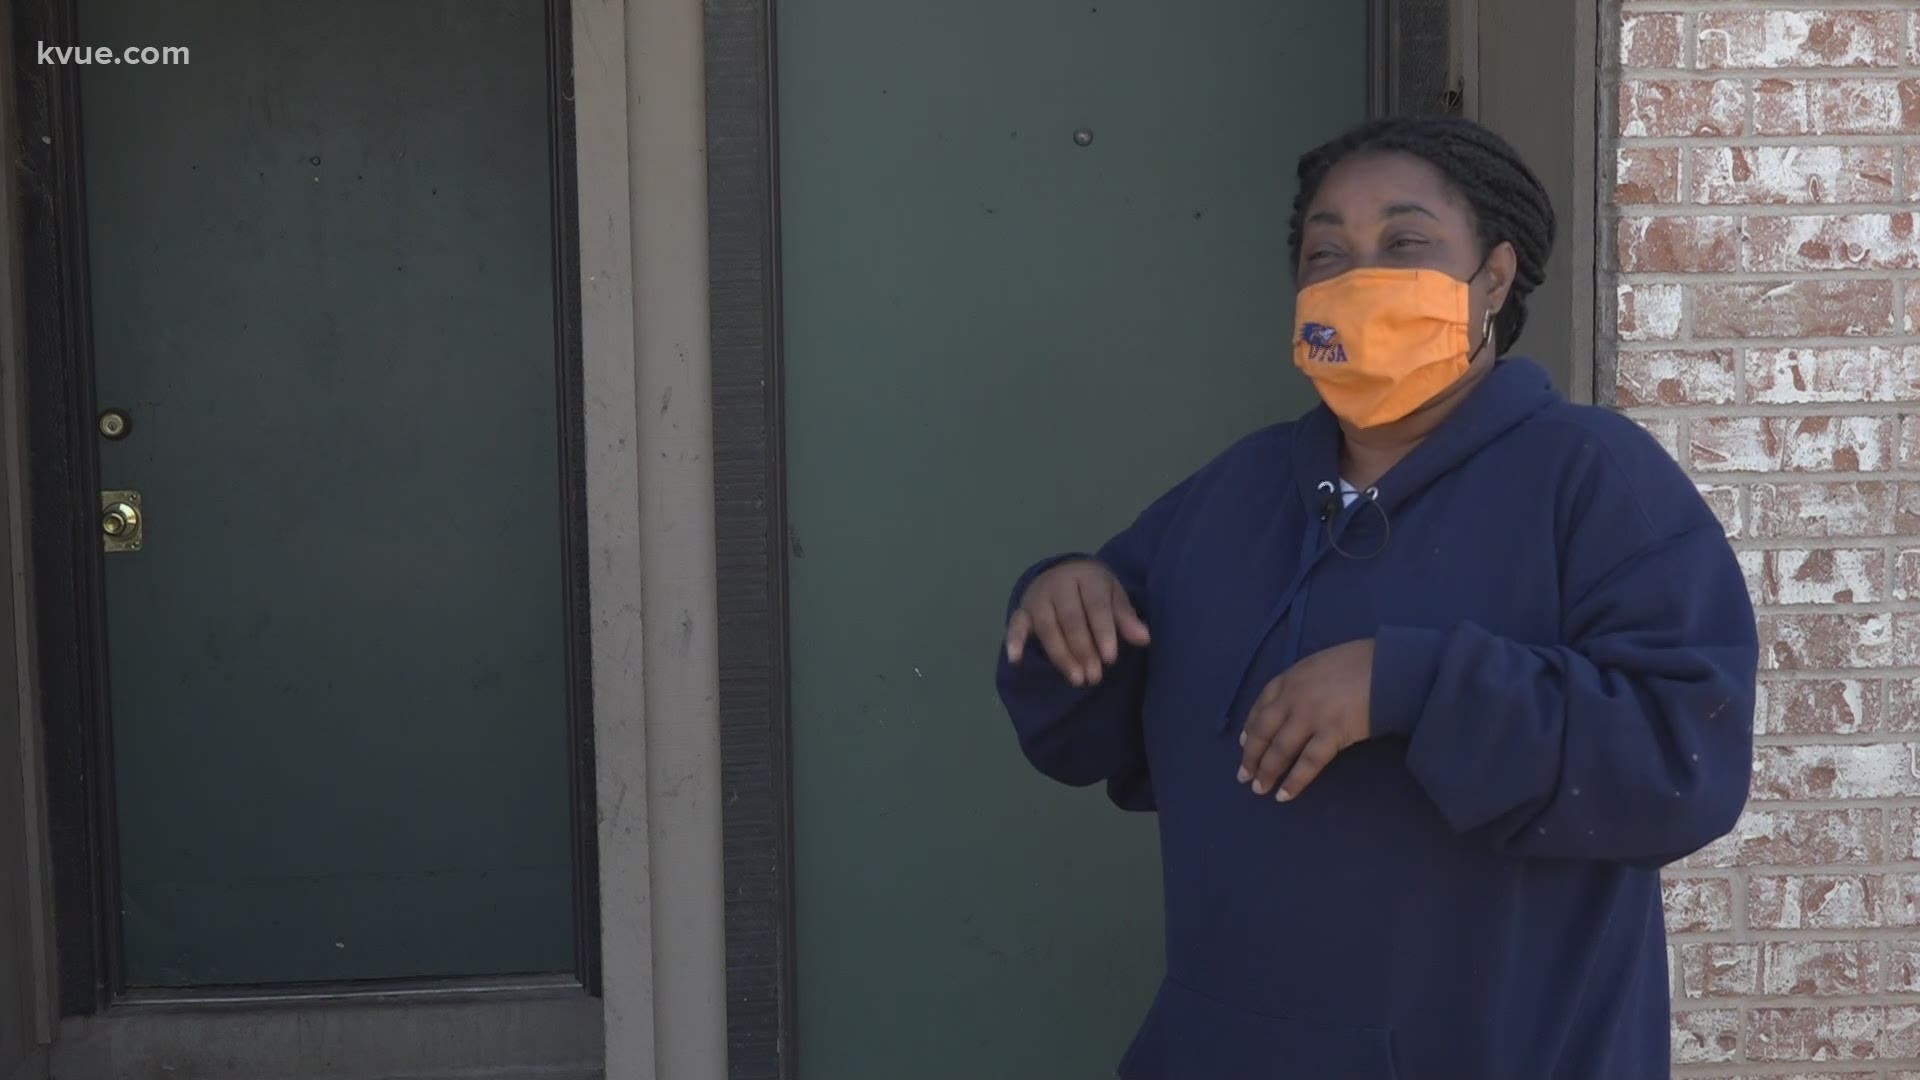 An East Austin apartment complex is still without gas after the winter storms. Now people at Mount Carmel Apartments are being told to move out.